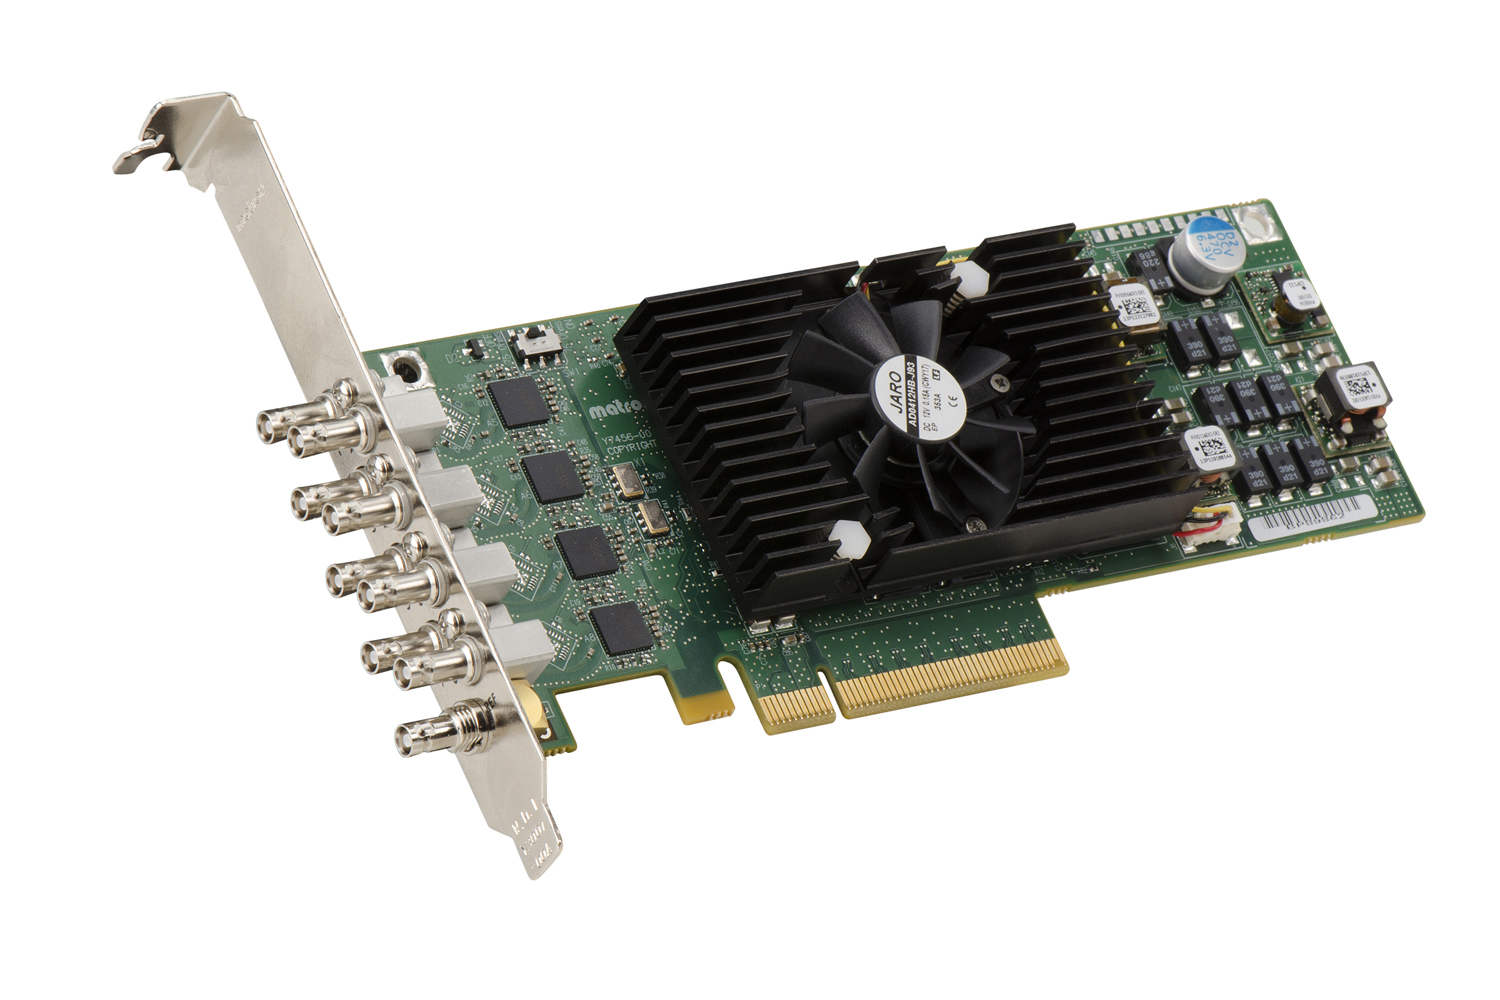 Matrox Announces Low-Profile, Multi-Channel SDI Card with High-Performance Hardware Processing 4